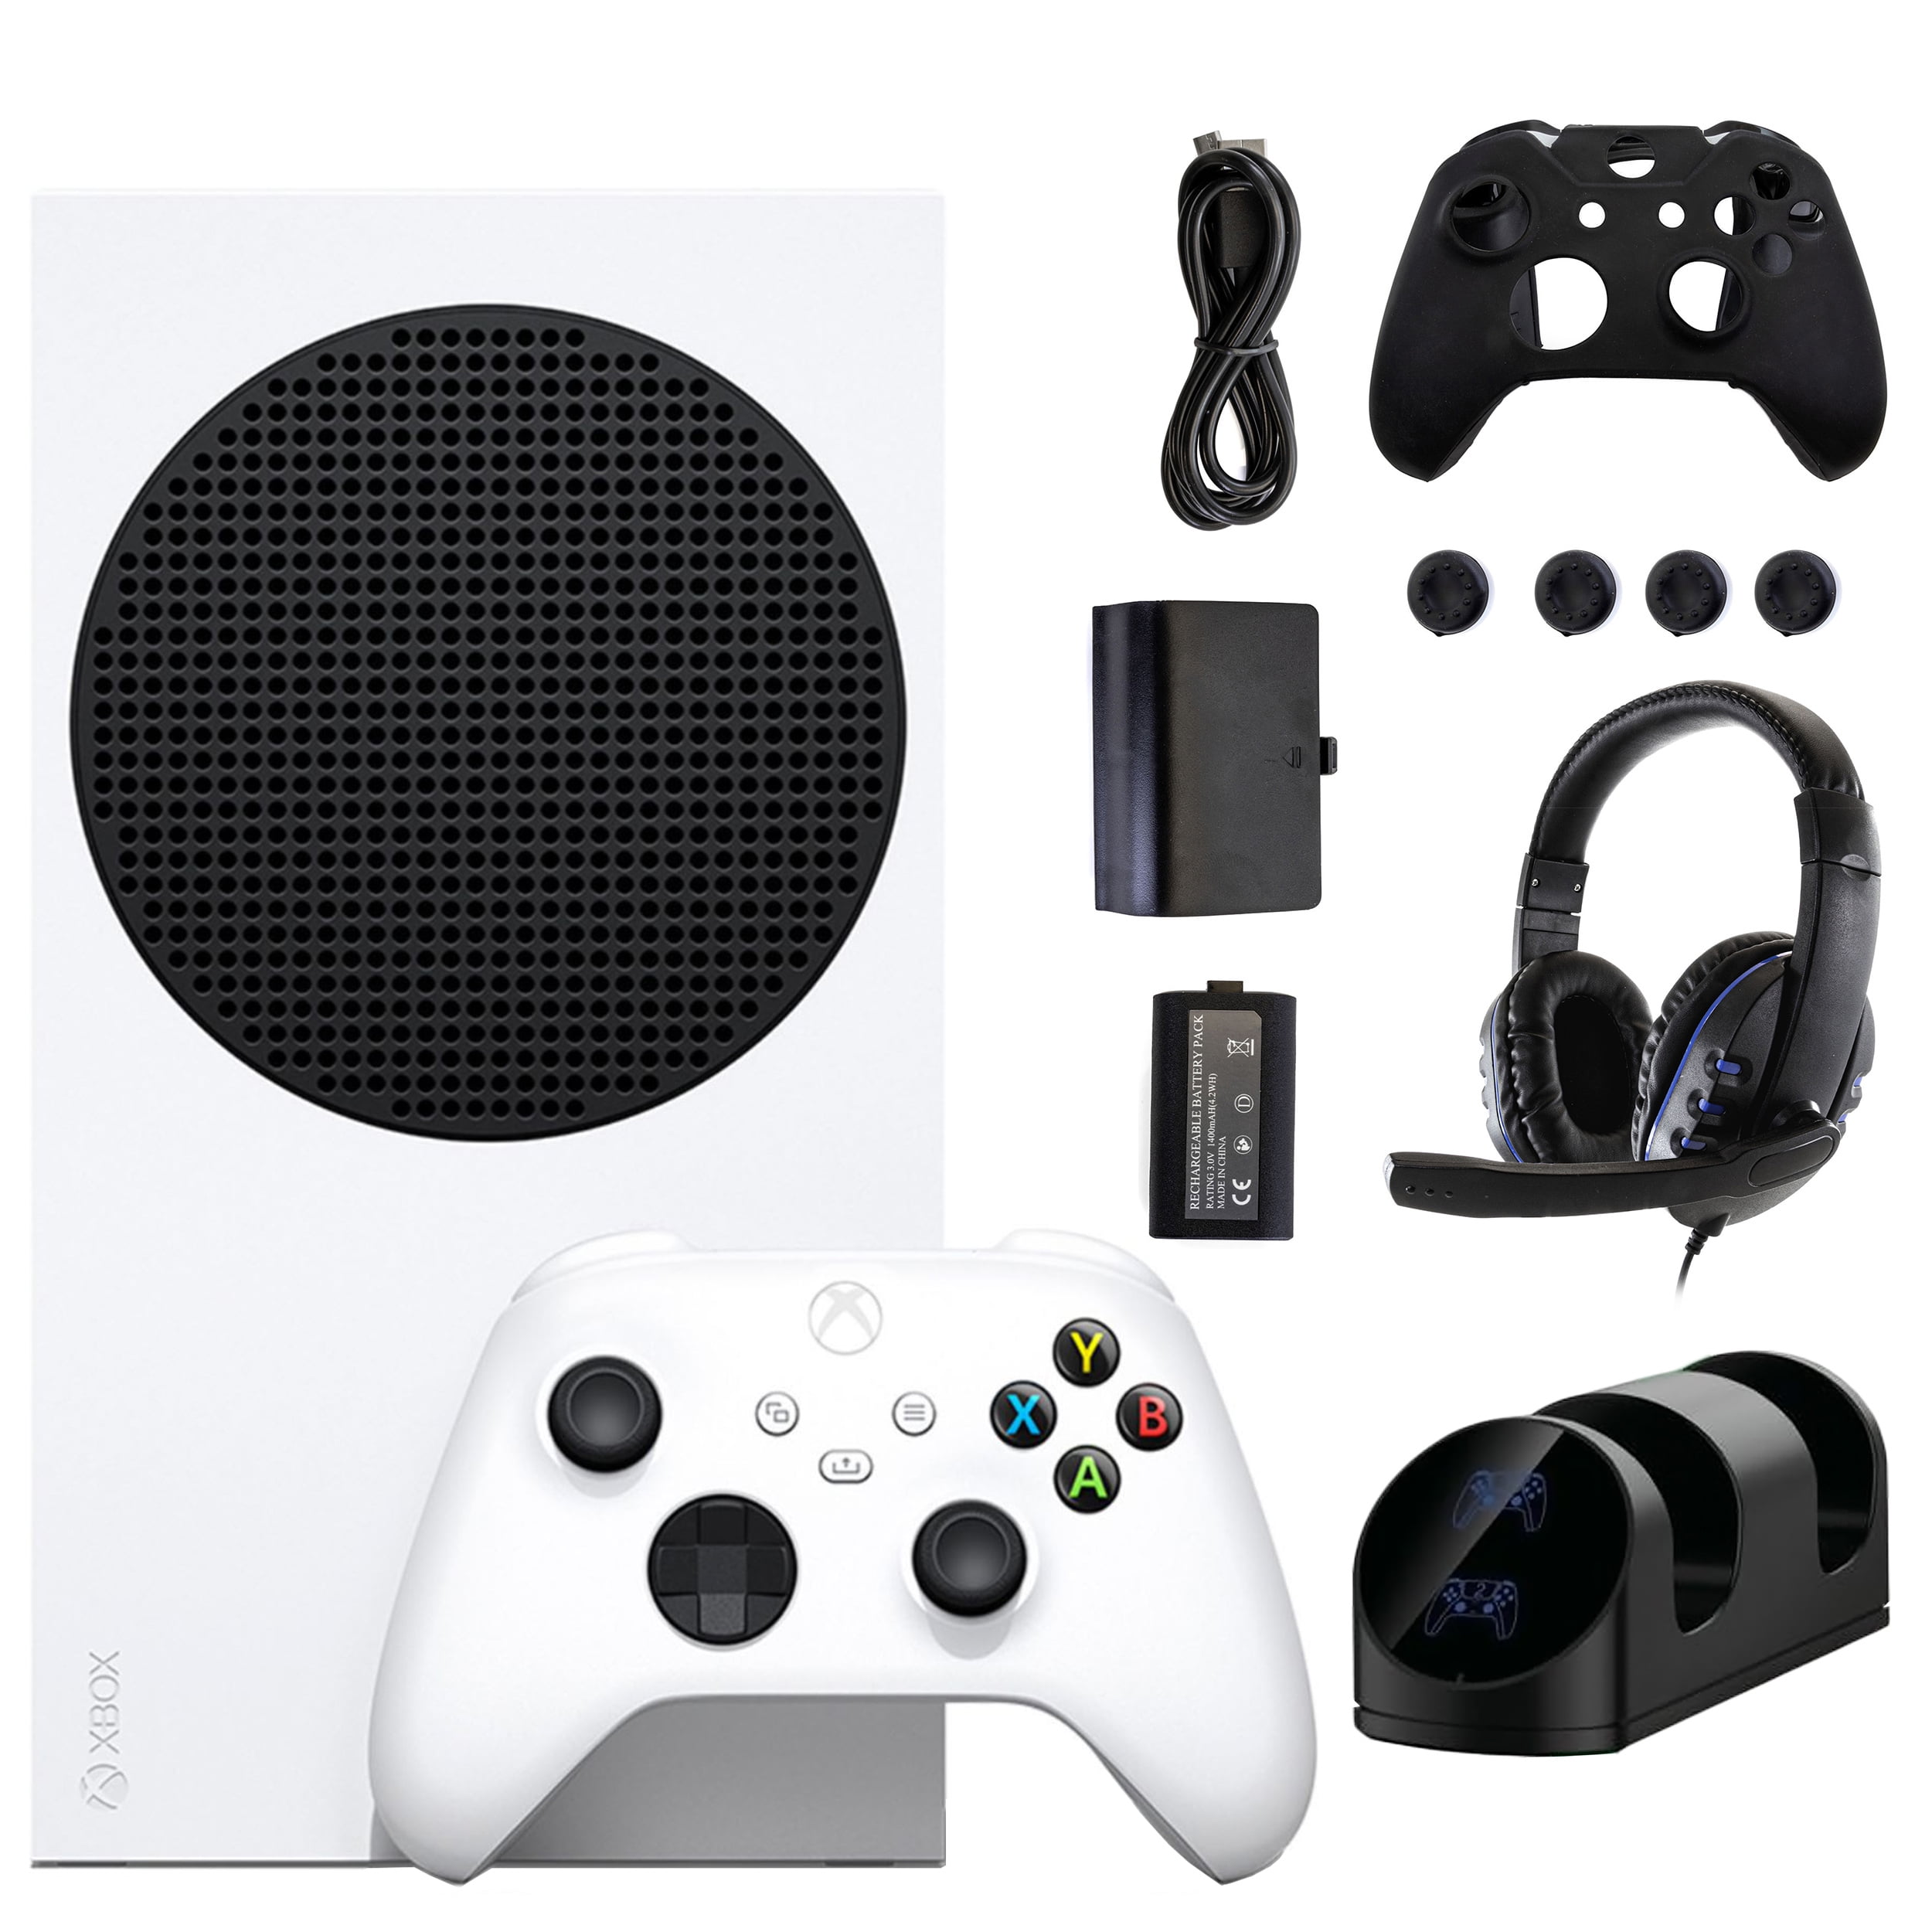 Xbox Series S 512 GB All-Digital Console with Accessories Kit - Walmart.com